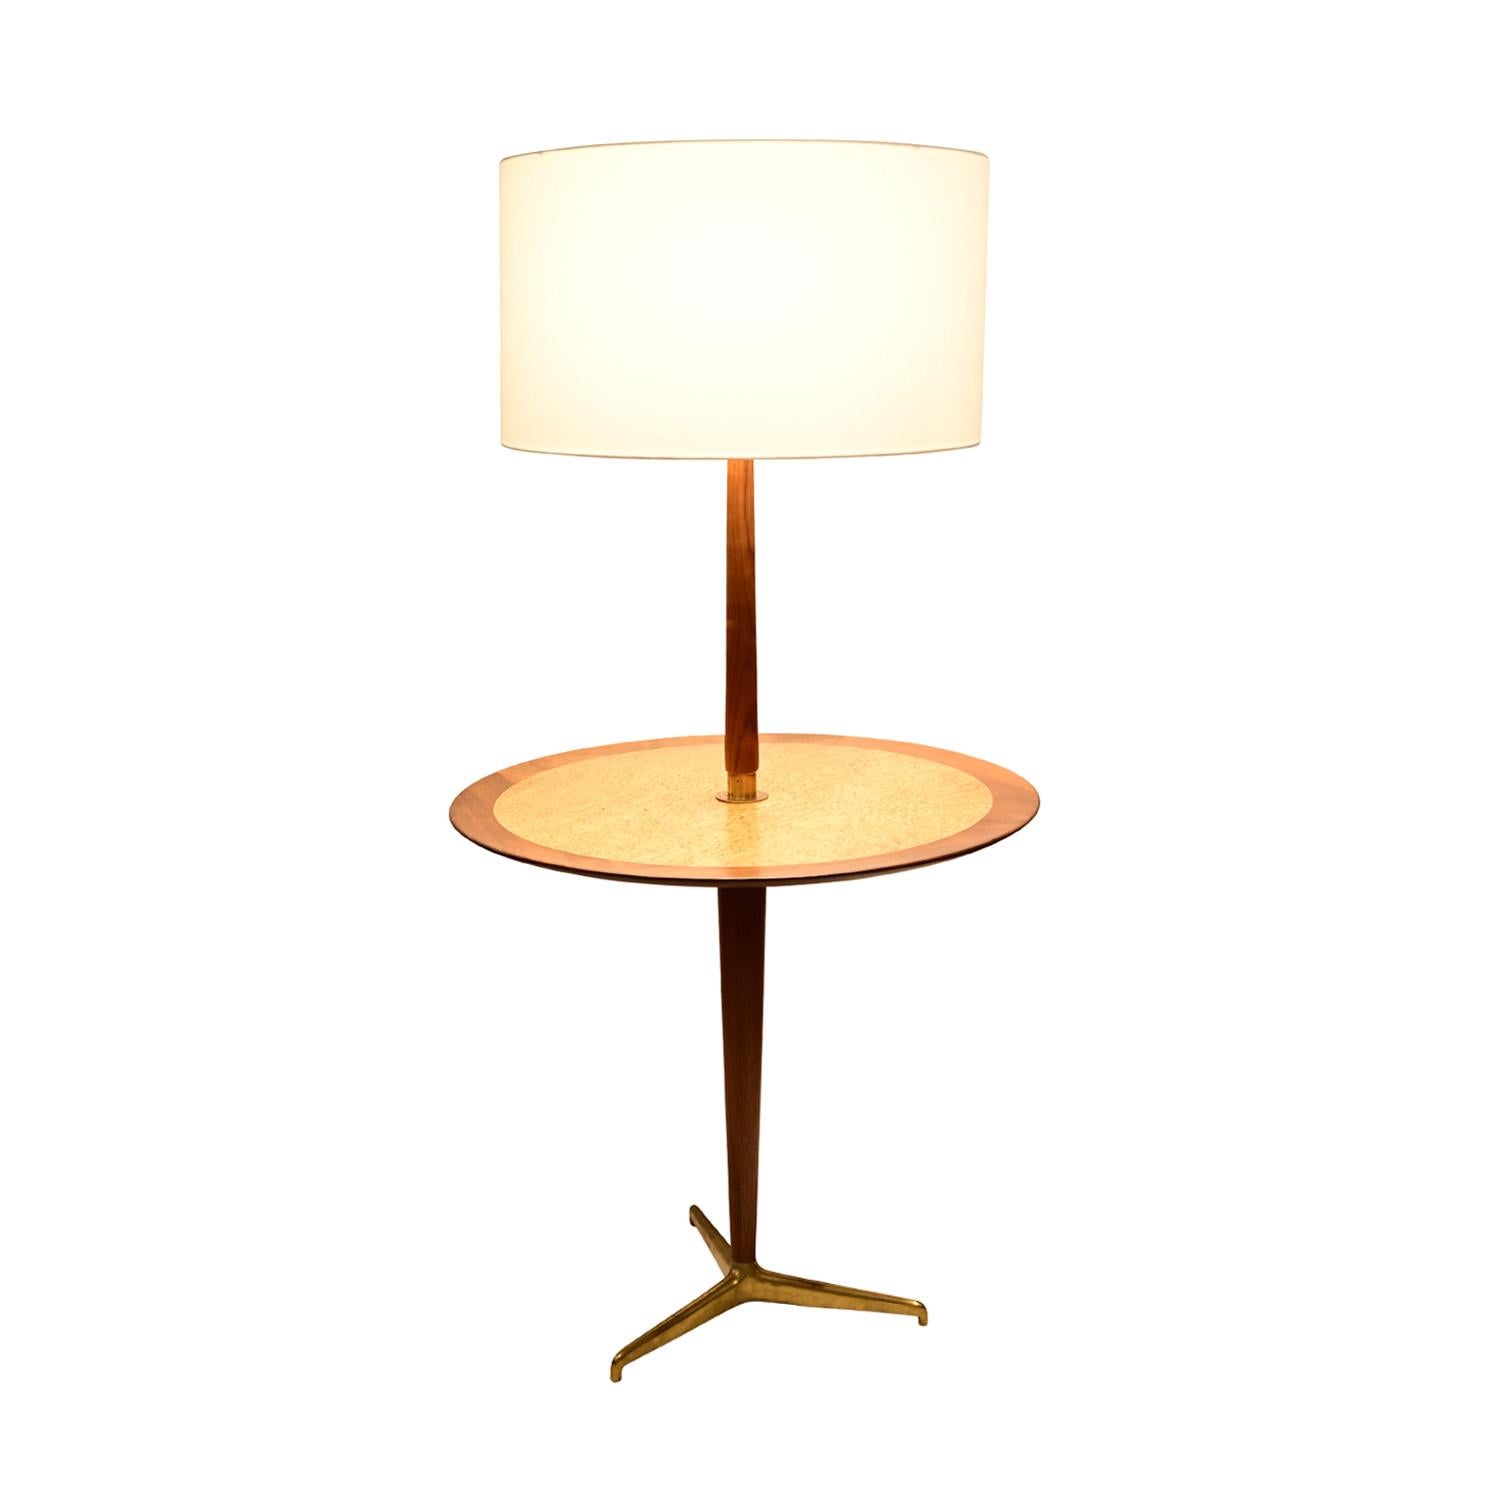 Mid-20th Century Edward Wormley for Dunbar Floor Lamp with Incorporated Table 1954 (Signed) For Sale